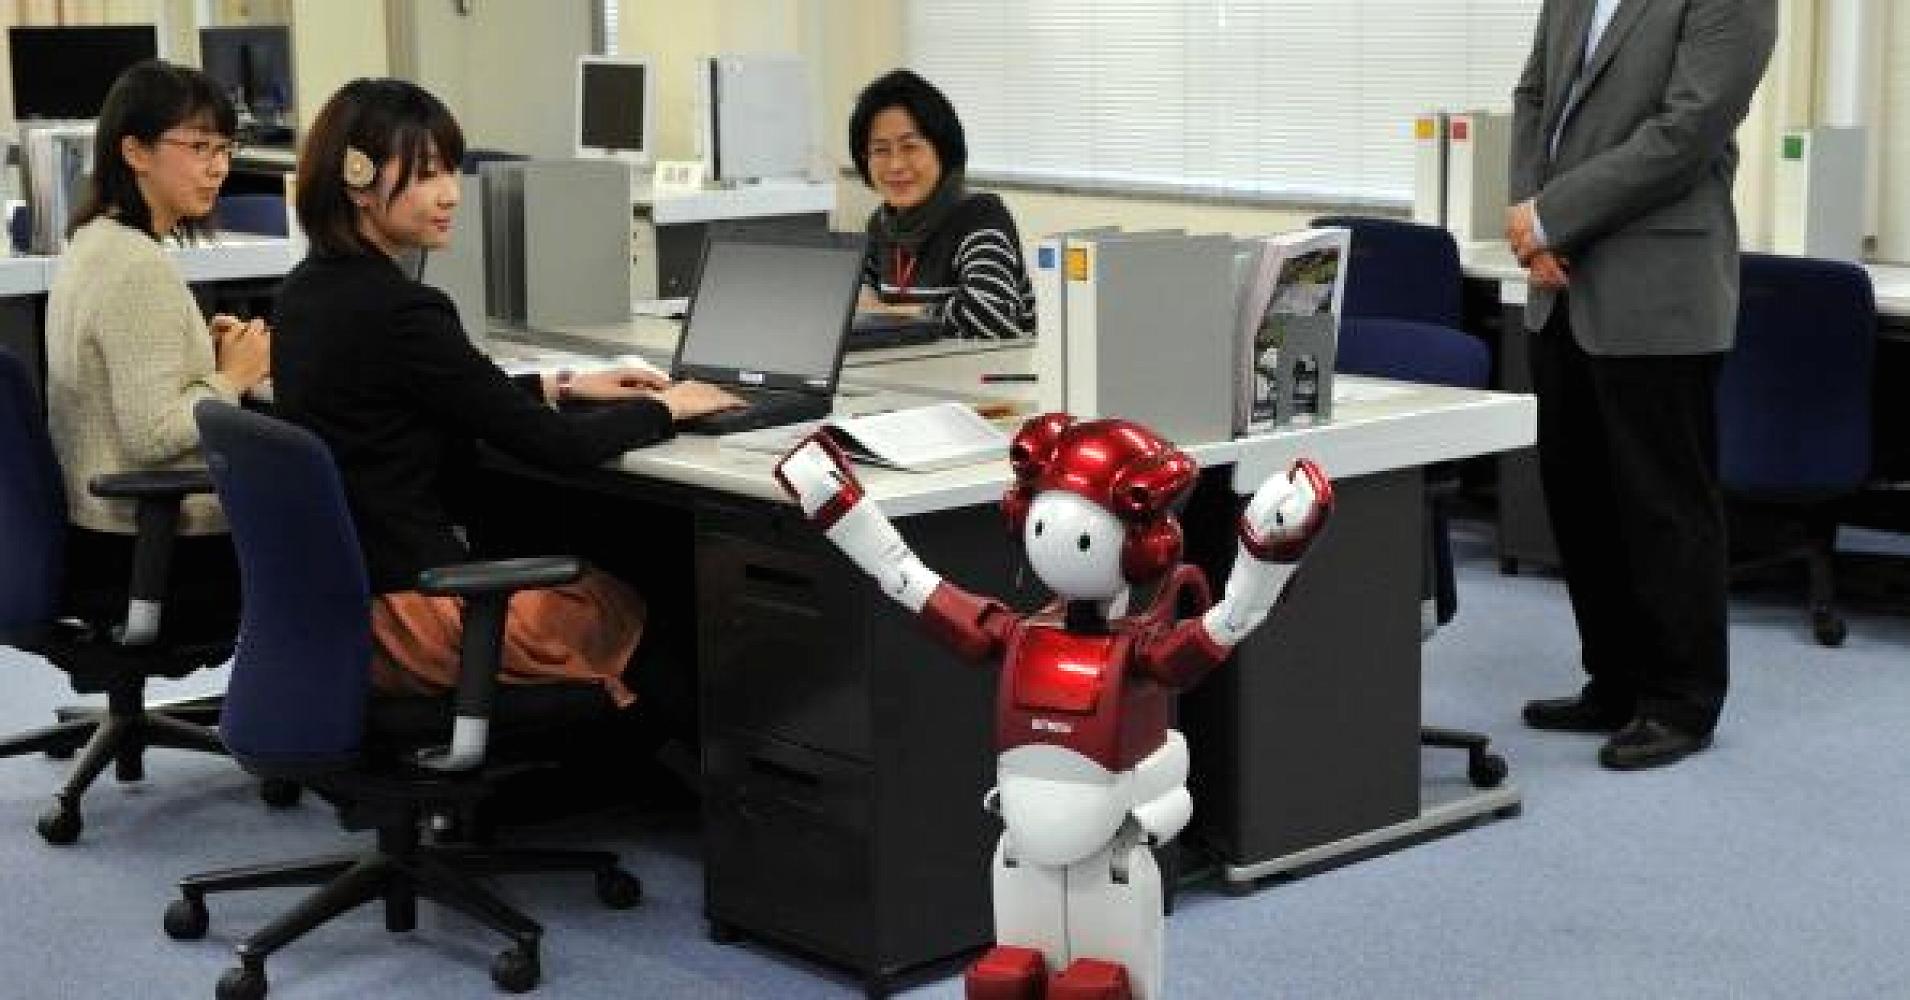 Japanese insurance company will drop 90% of tasks on AI to keep jobs for people